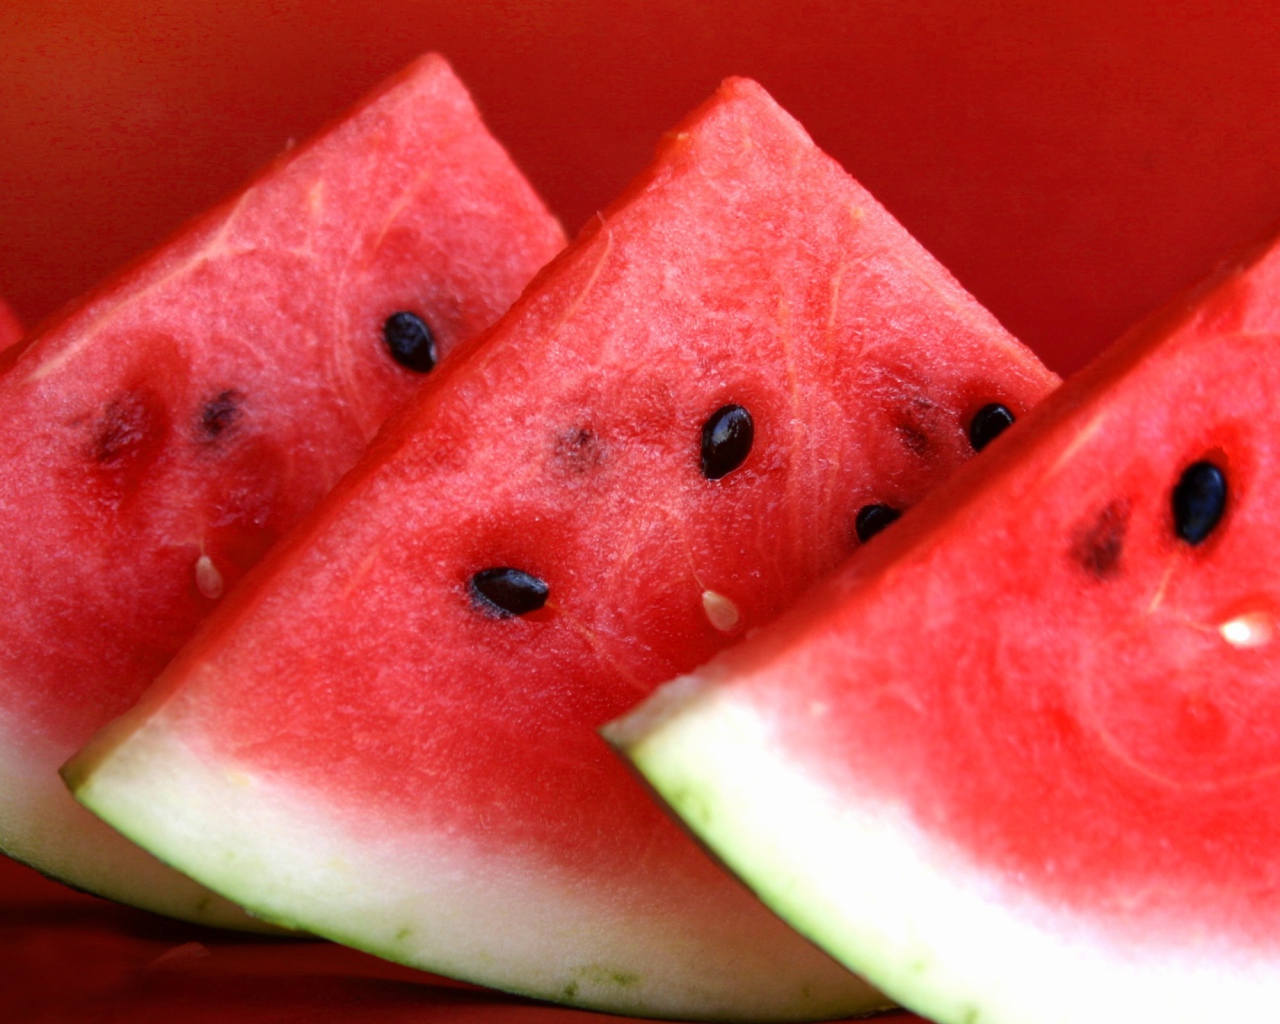 Delicious chunks of watermelon